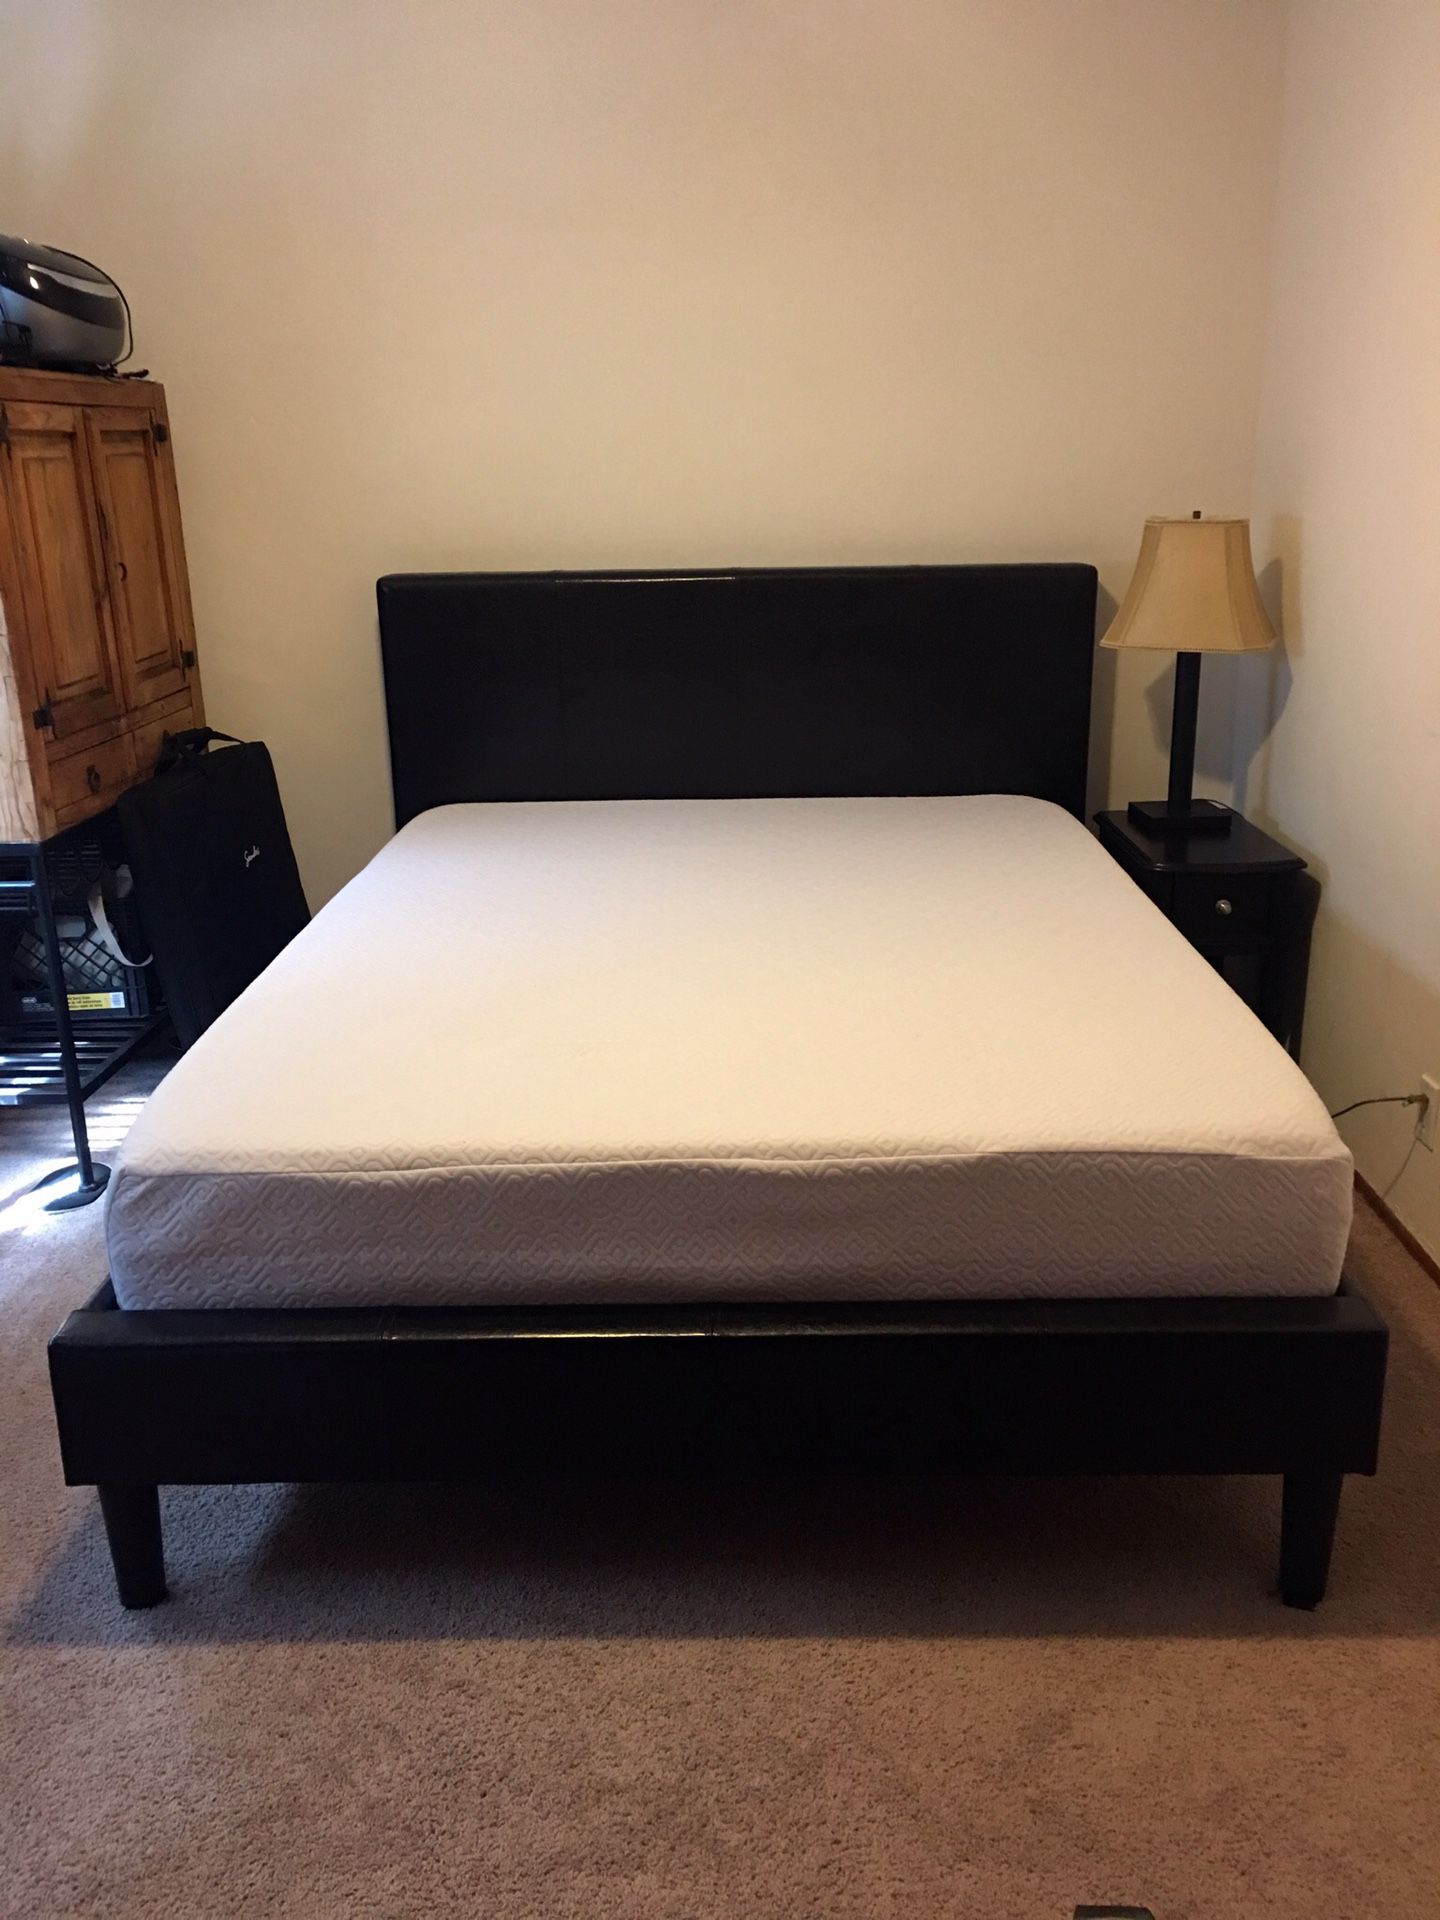 Queen bed set with memory foam mattress, like new!j